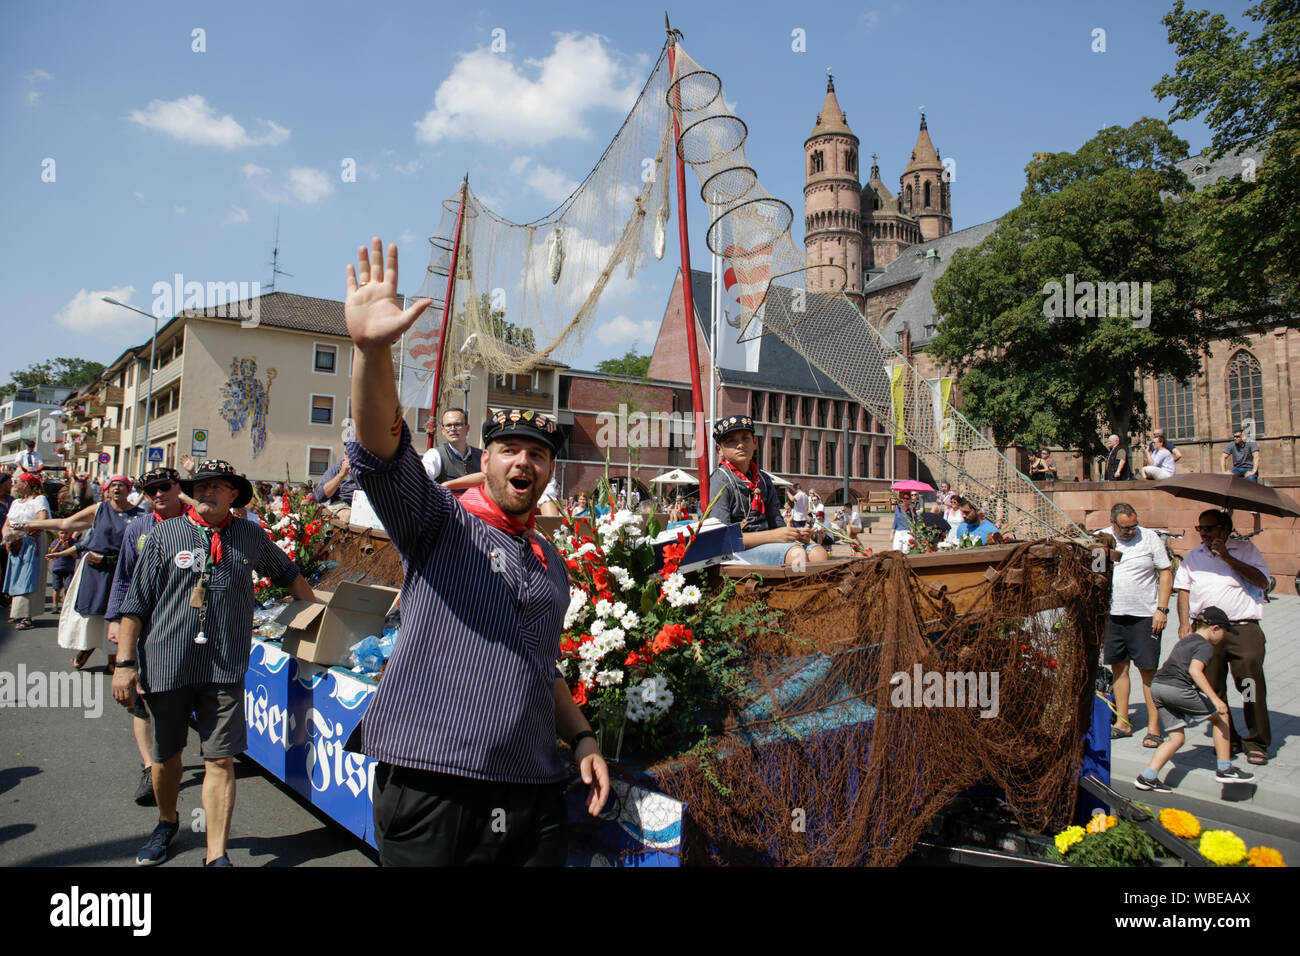 Worms, Germany. 25th August 2019. Members of the old fishermen's guild of Worms march in the parade with a large sailing boat. The first highlight of the 2019 Backfischfest was the big parade through the city of Worms with over 70 groups and floats. Community groups, music groups and businesses from Worms and further afield took part. Stock Photo